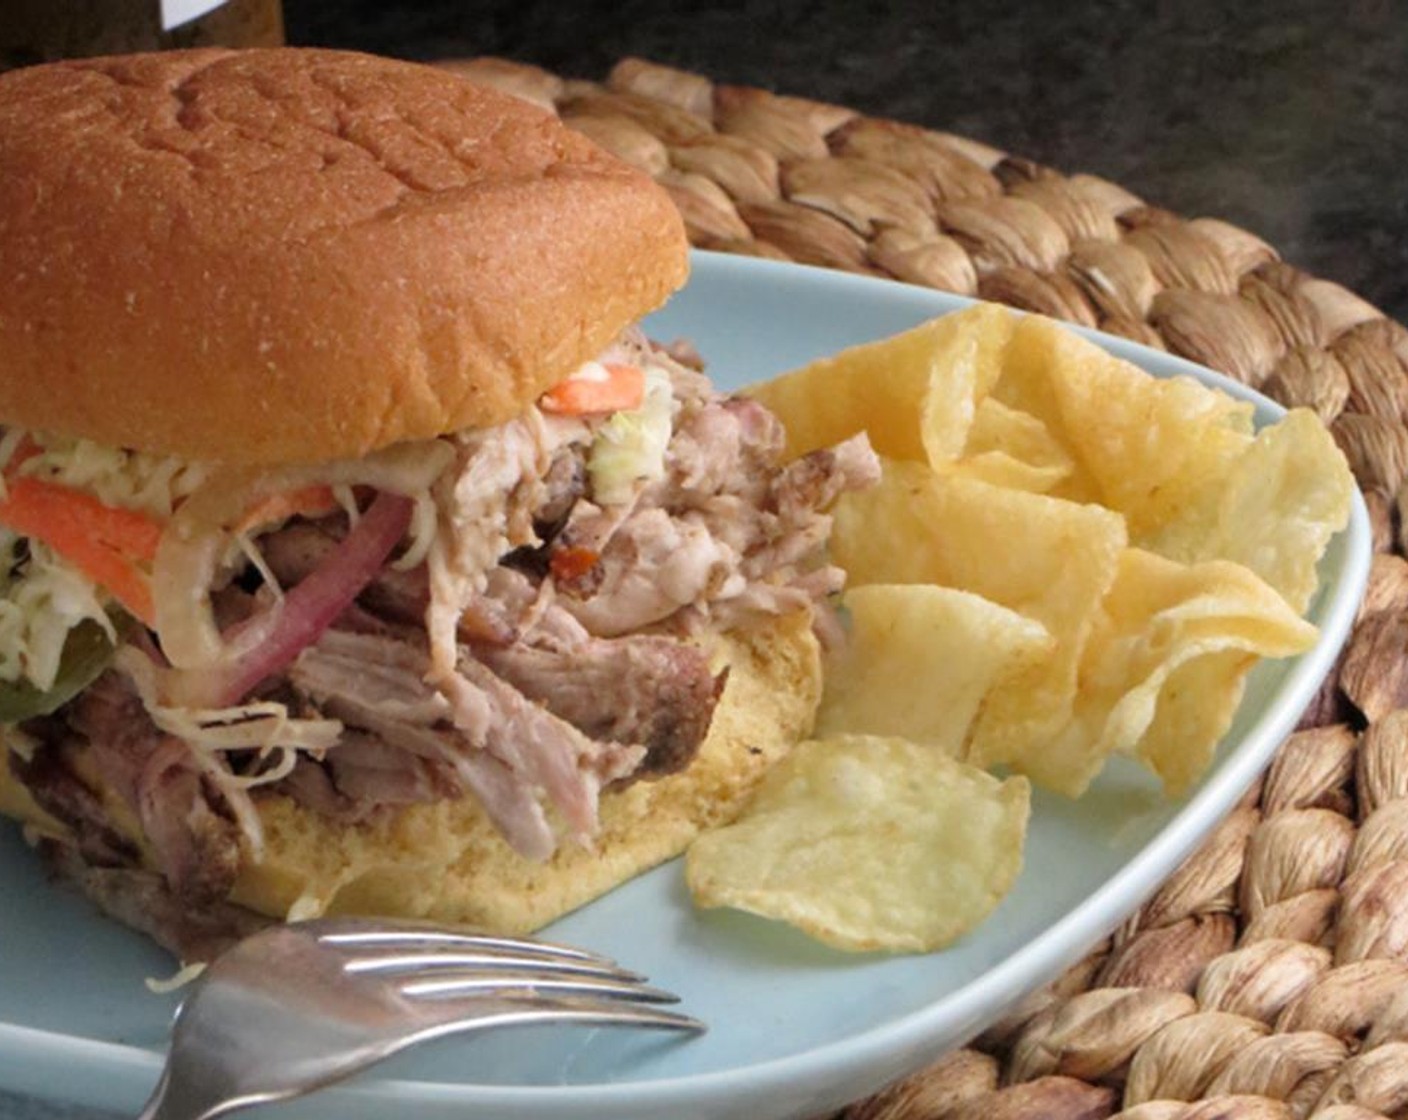 step 14 Add pieces of skin and fat back to the meat to suit your tastes. To serve, pile pork on Hamburger Buns (12) and top with a spoonful of Coleslaw Mix (to taste). Enjoy!